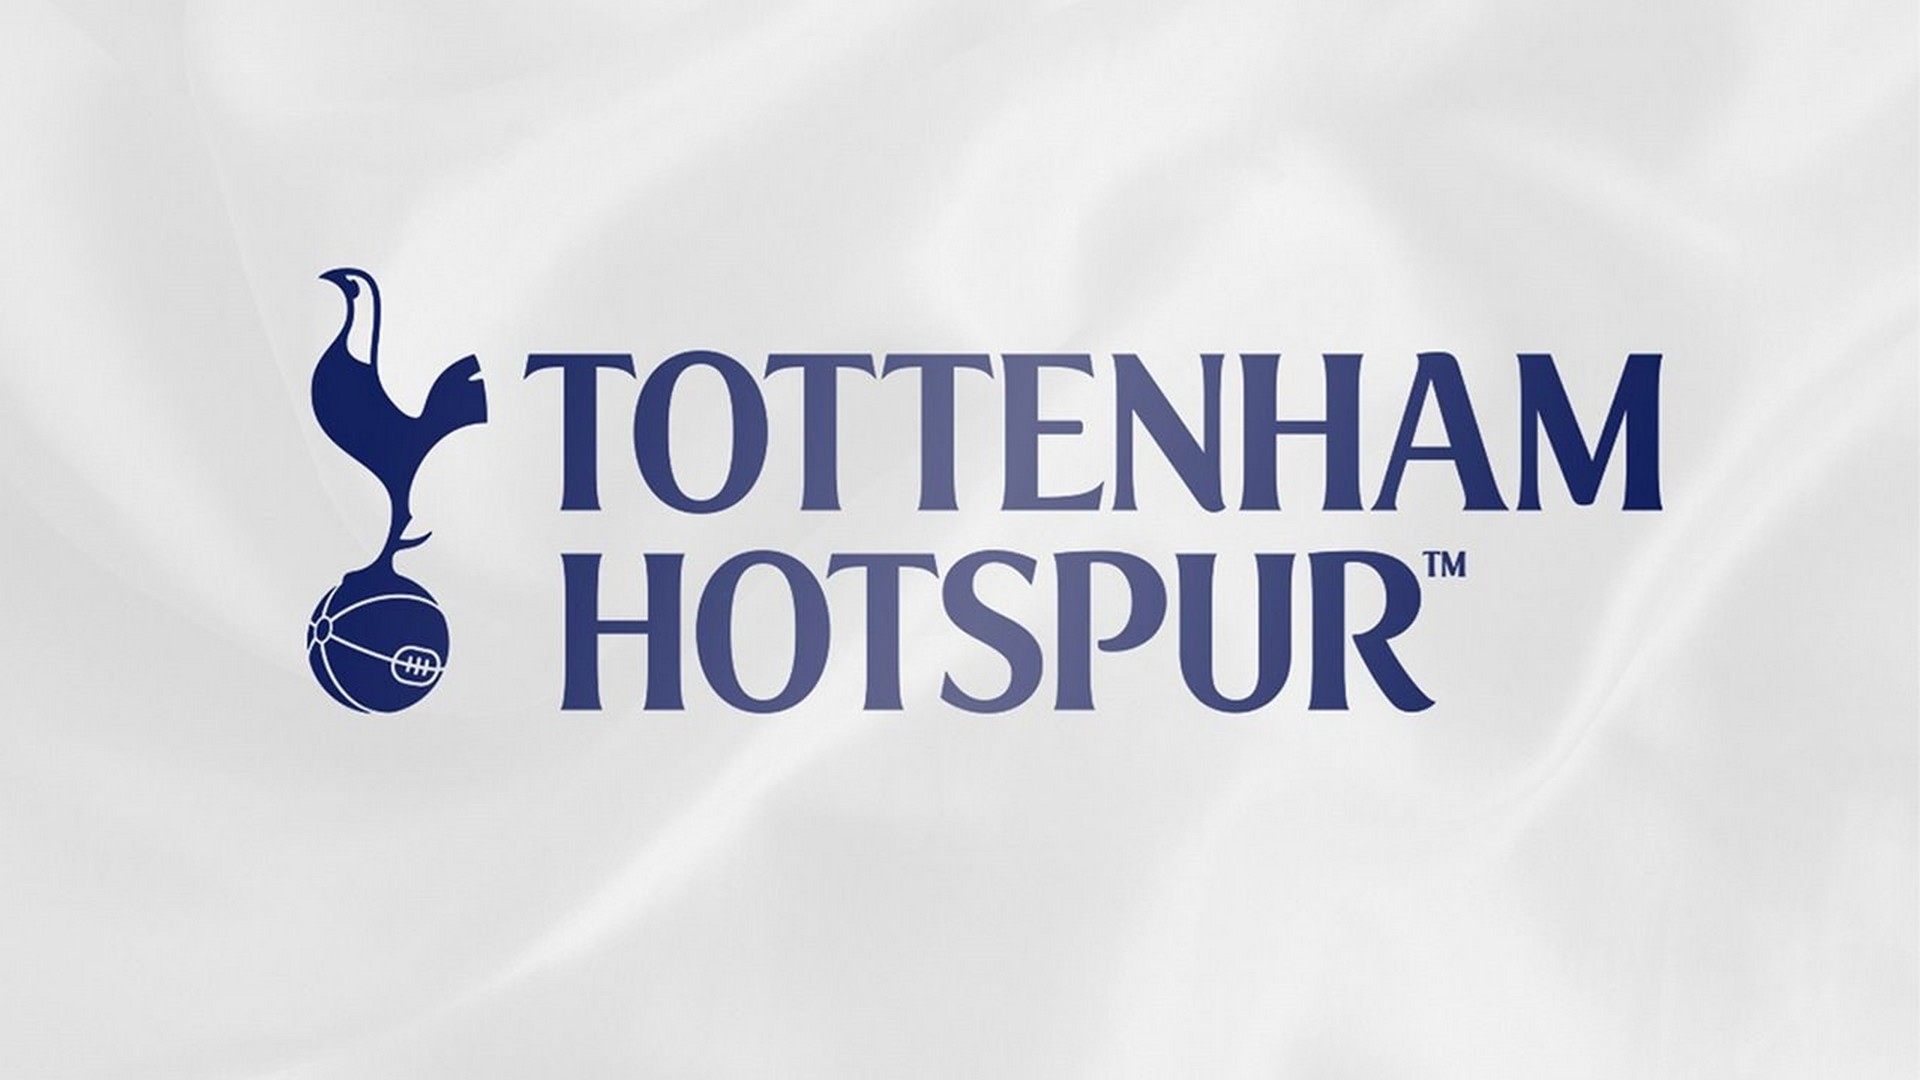 HD Desktop Wallpaper Tottenham Hotspur With high-resolution 1920X1080 pixel. You can use this wallpaper for your Desktop Computers, Mac Screensavers, Windows Backgrounds, iPhone Wallpapers, Tablet or Android Lock screen and another Mobile device